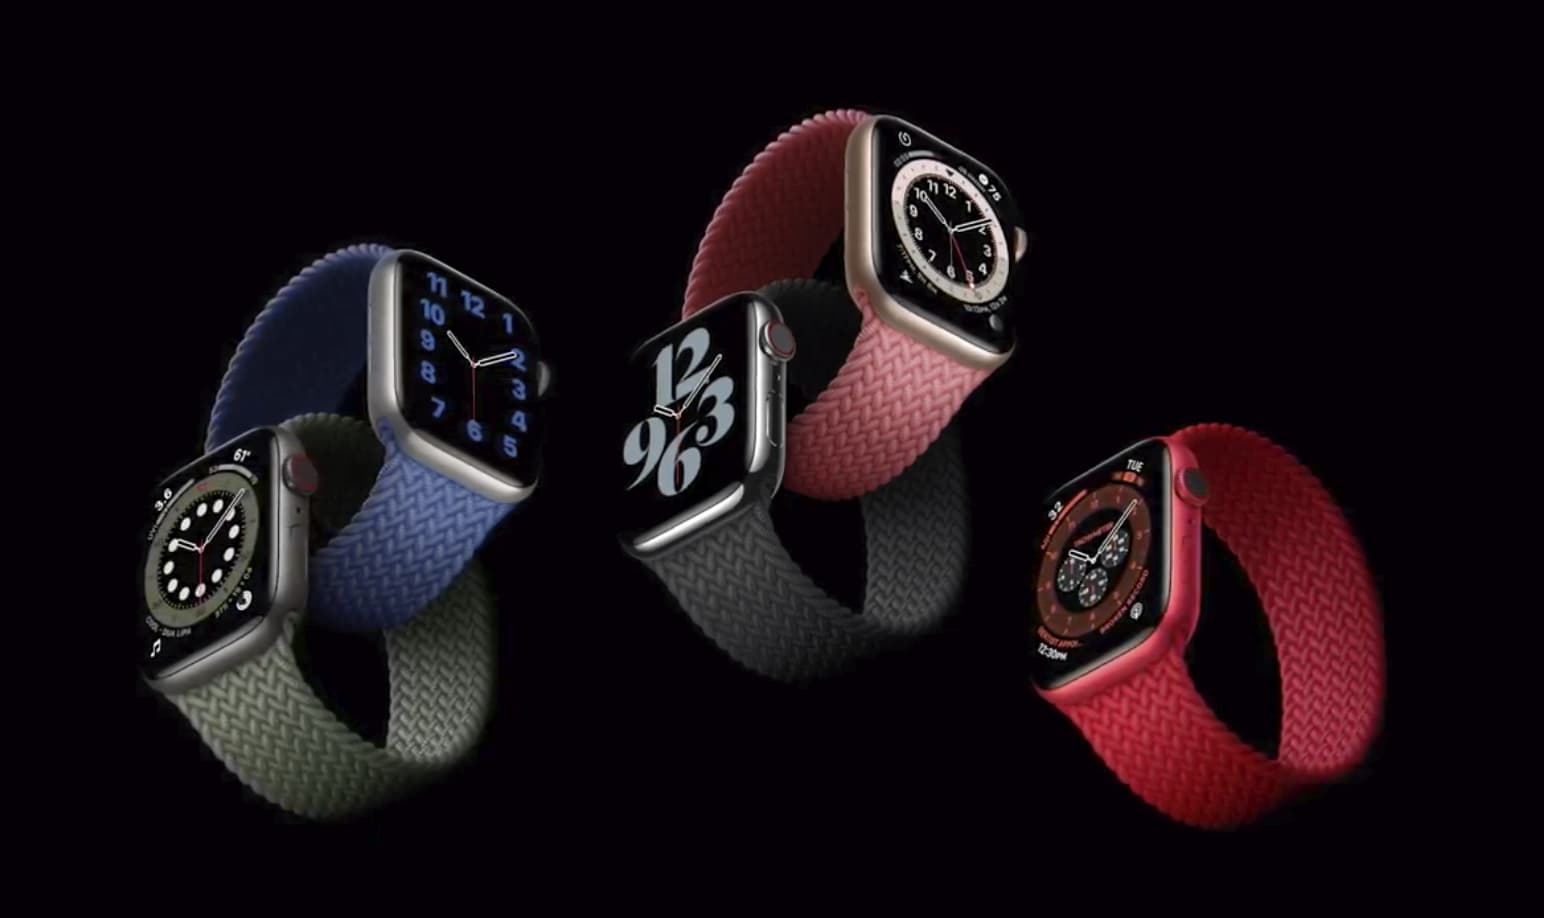 Does Apple Watch Work Without an iPhone?